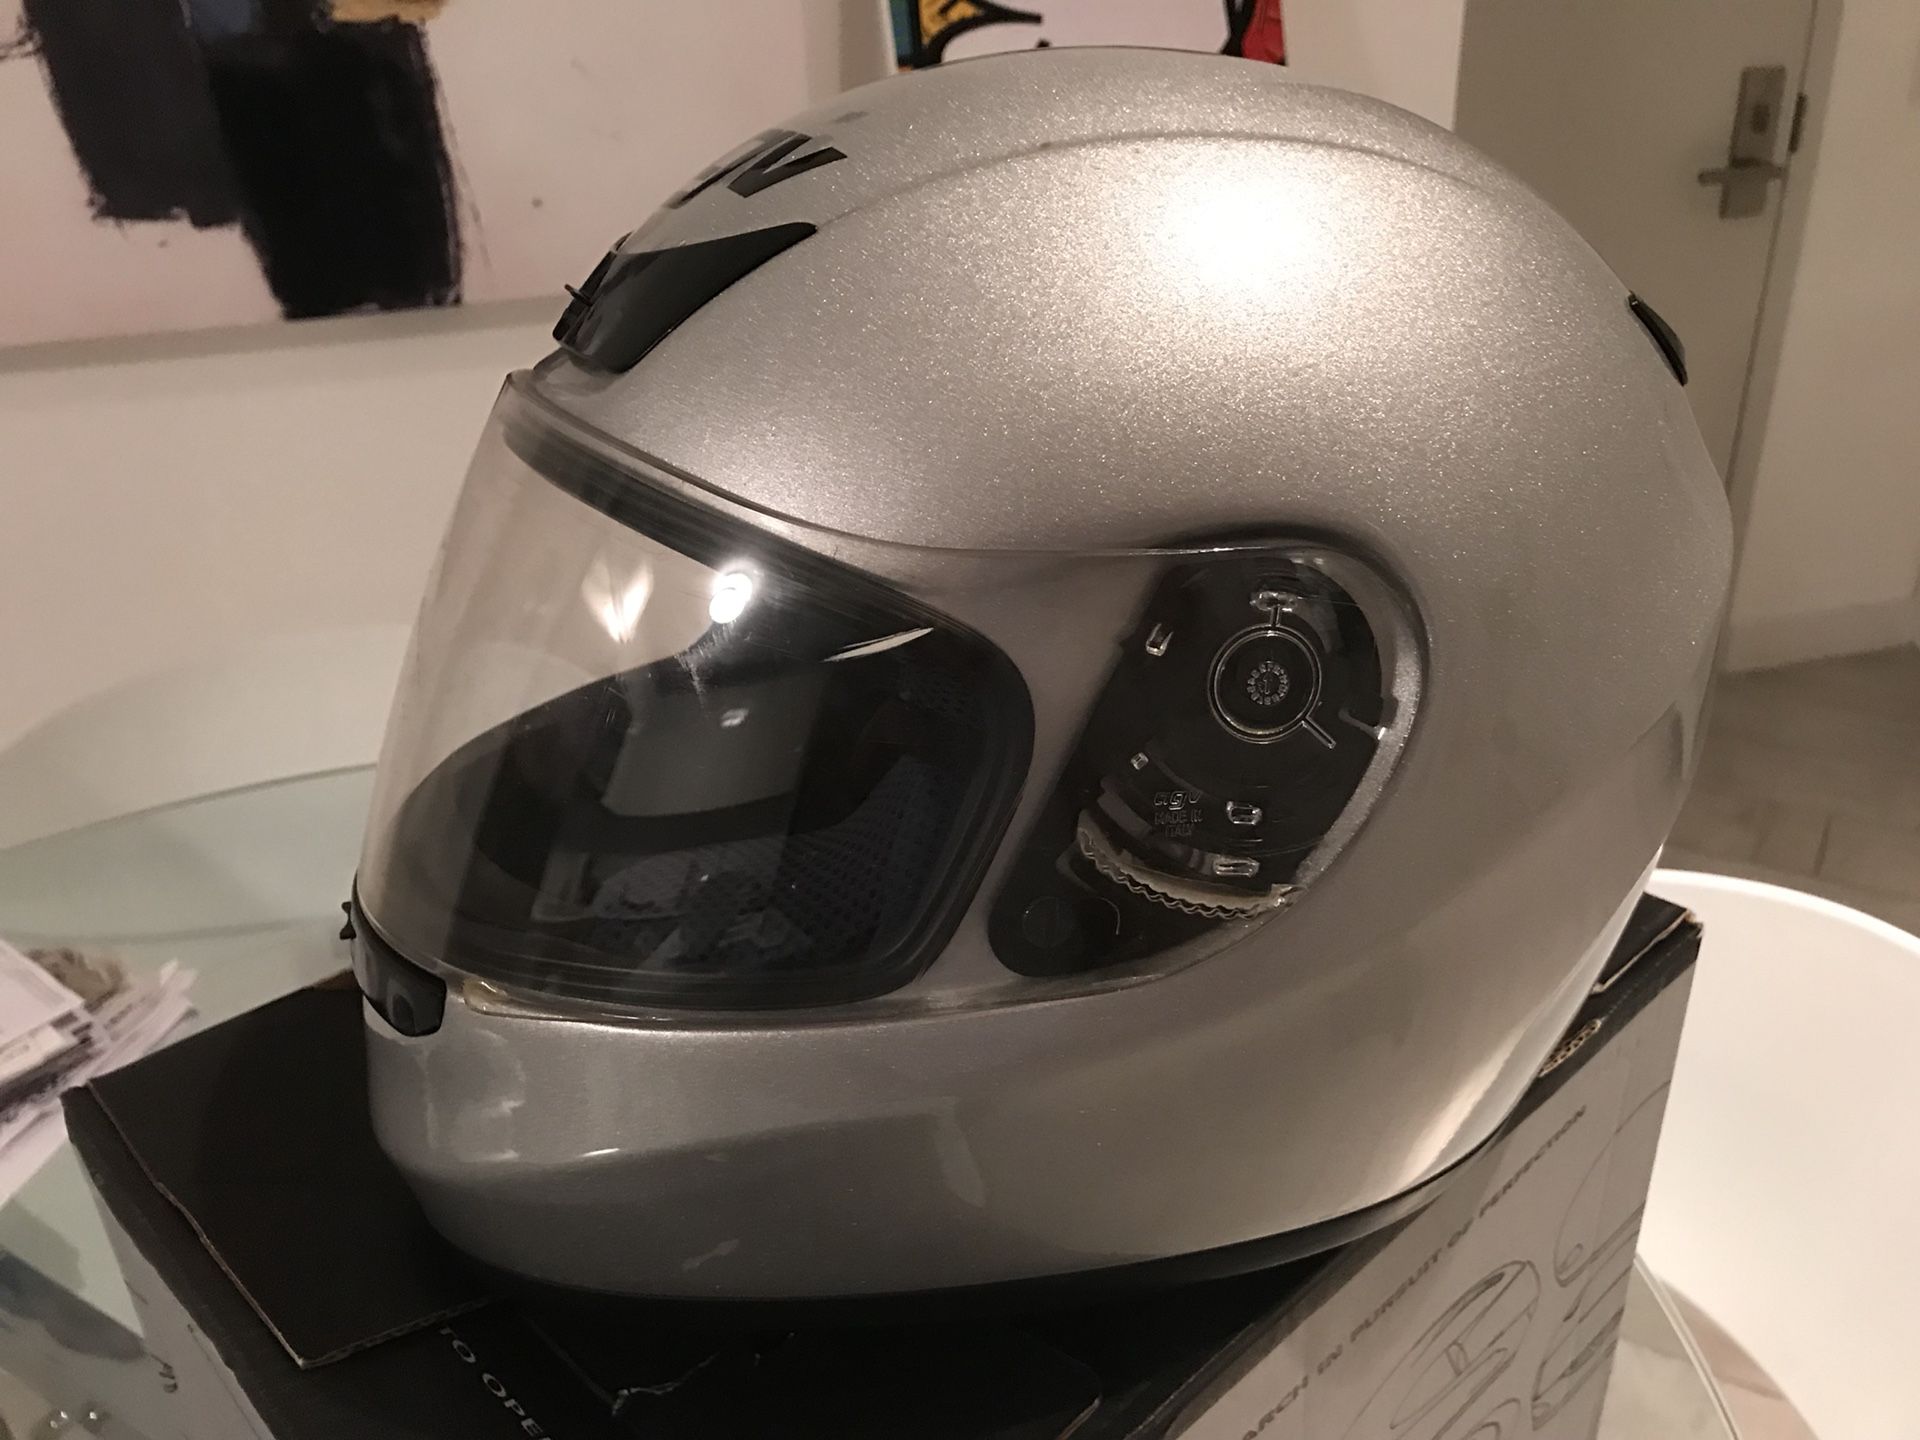 AGV helmet for motorbike in perfect condition, hardly used, original price €289